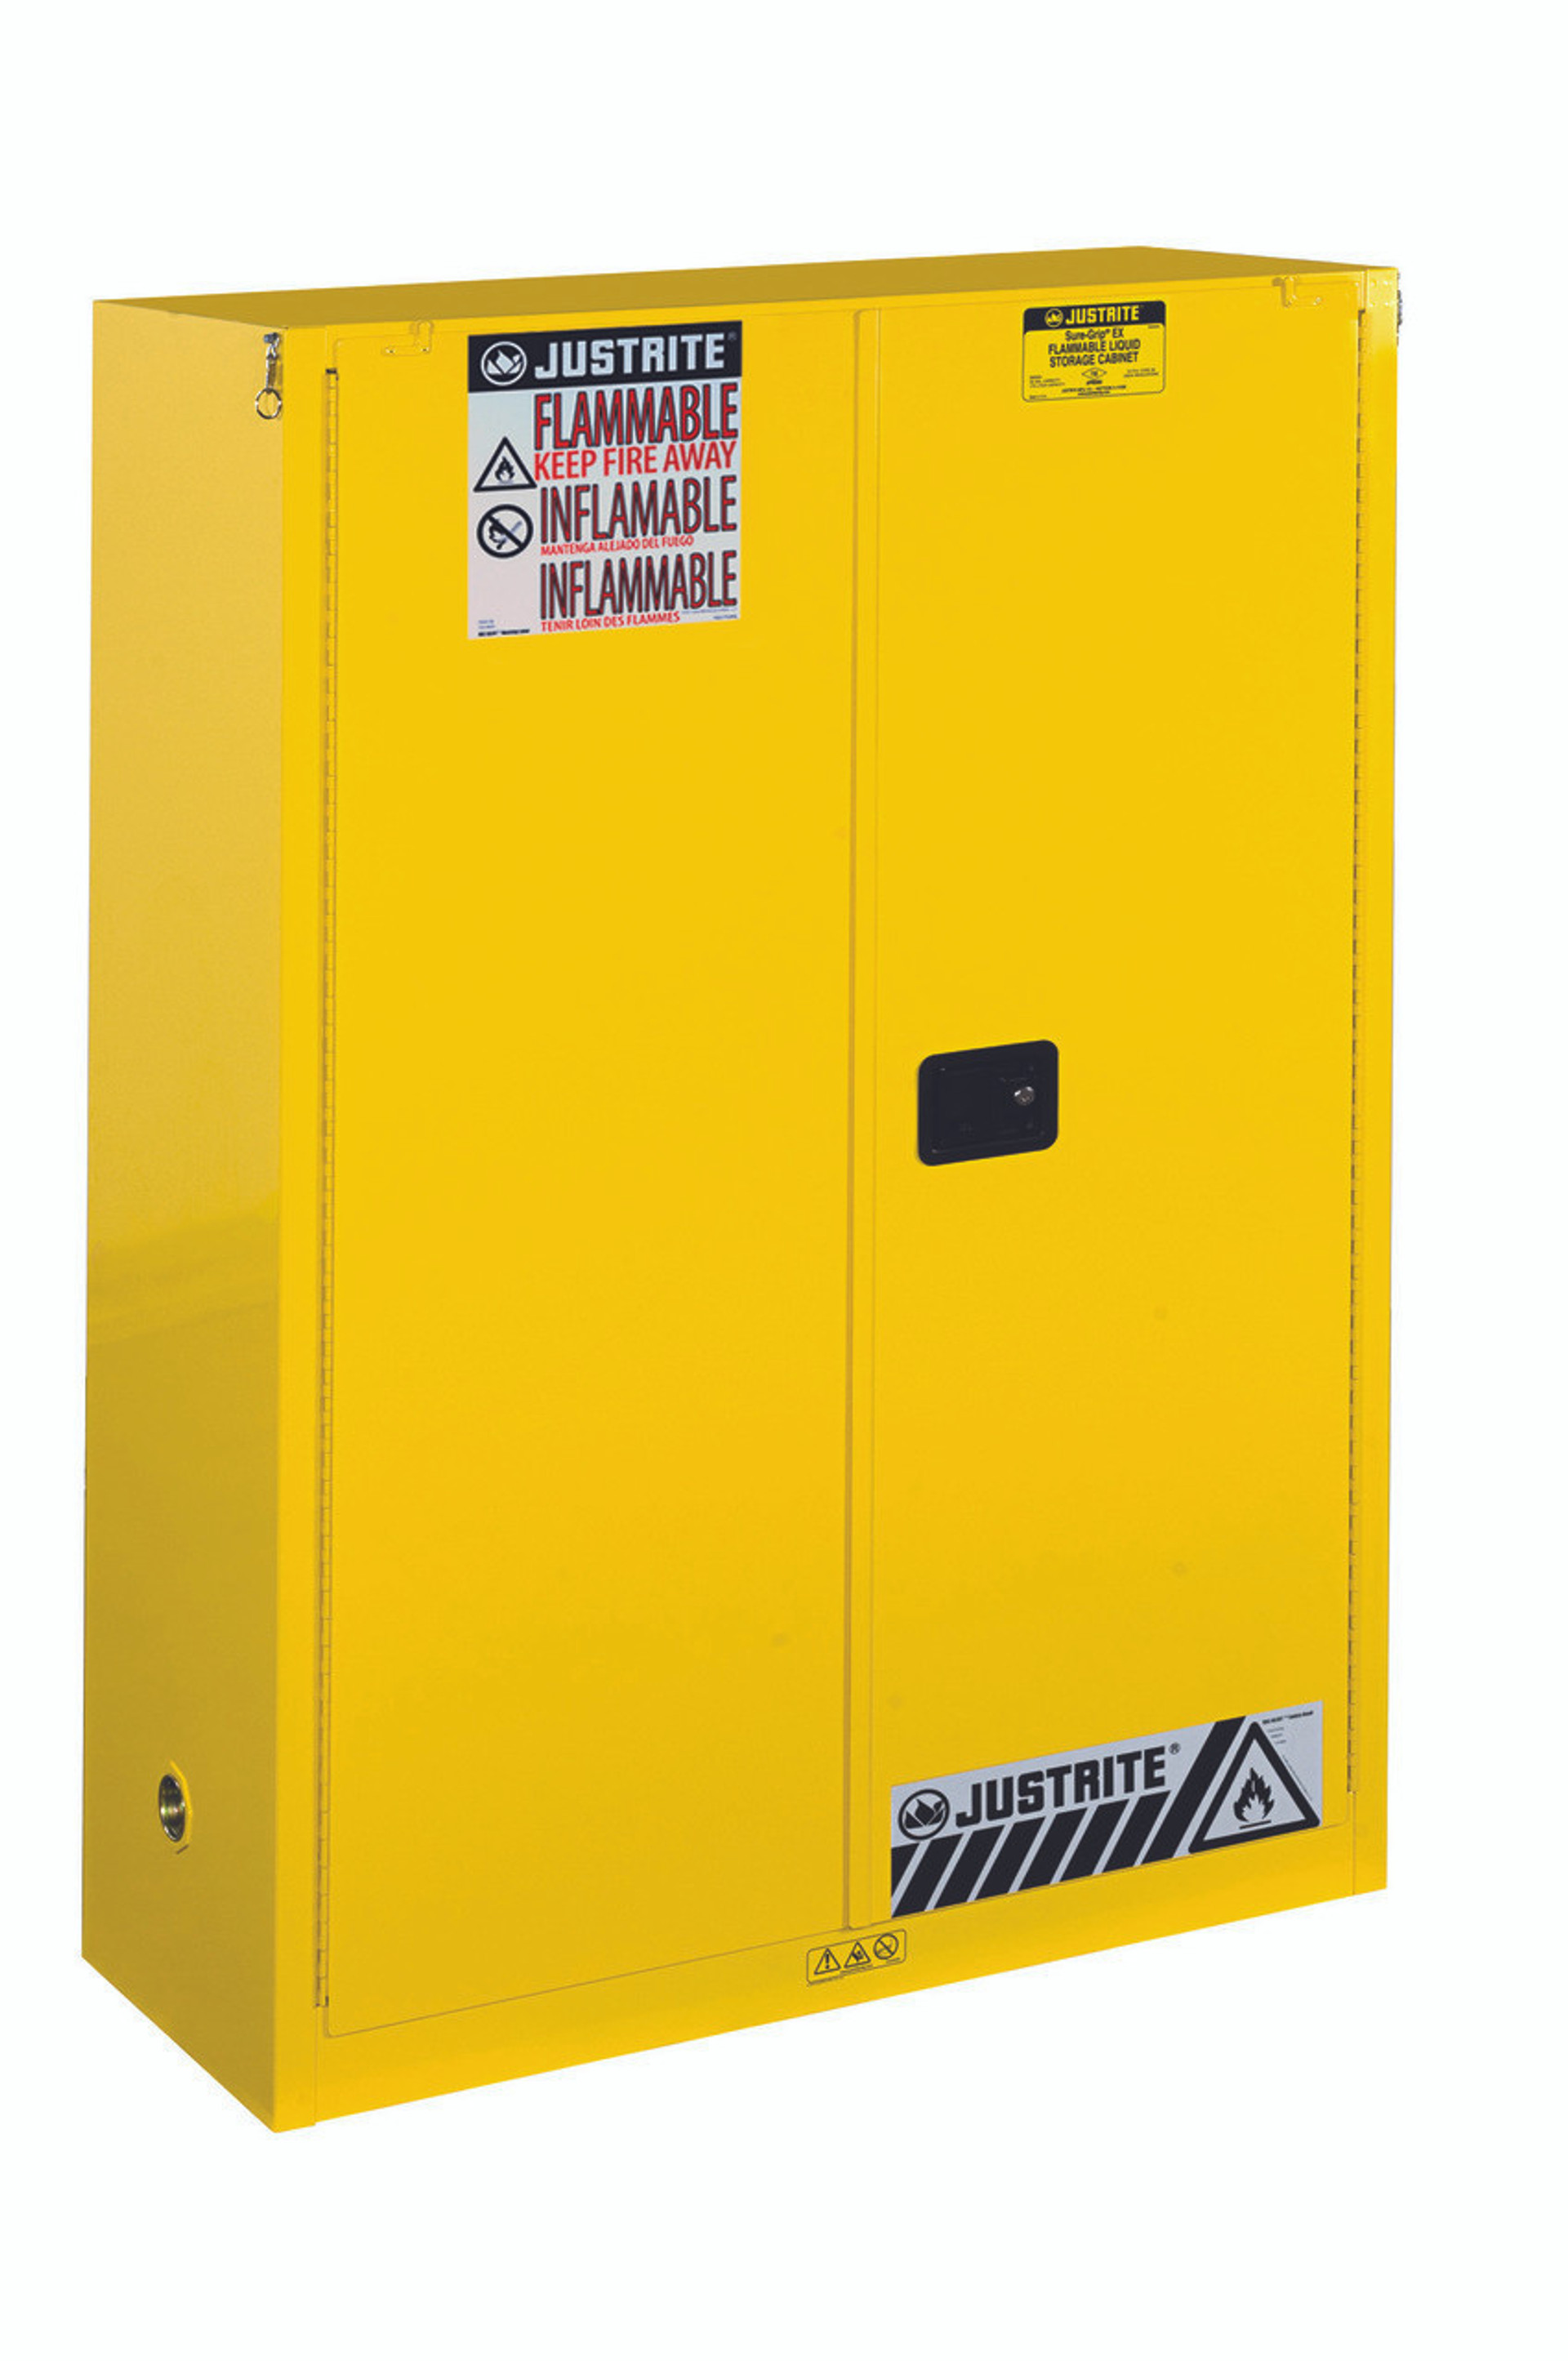 Justrite 45 Gal Flammable Safety Cabinet - 894520 Justrite Self Close